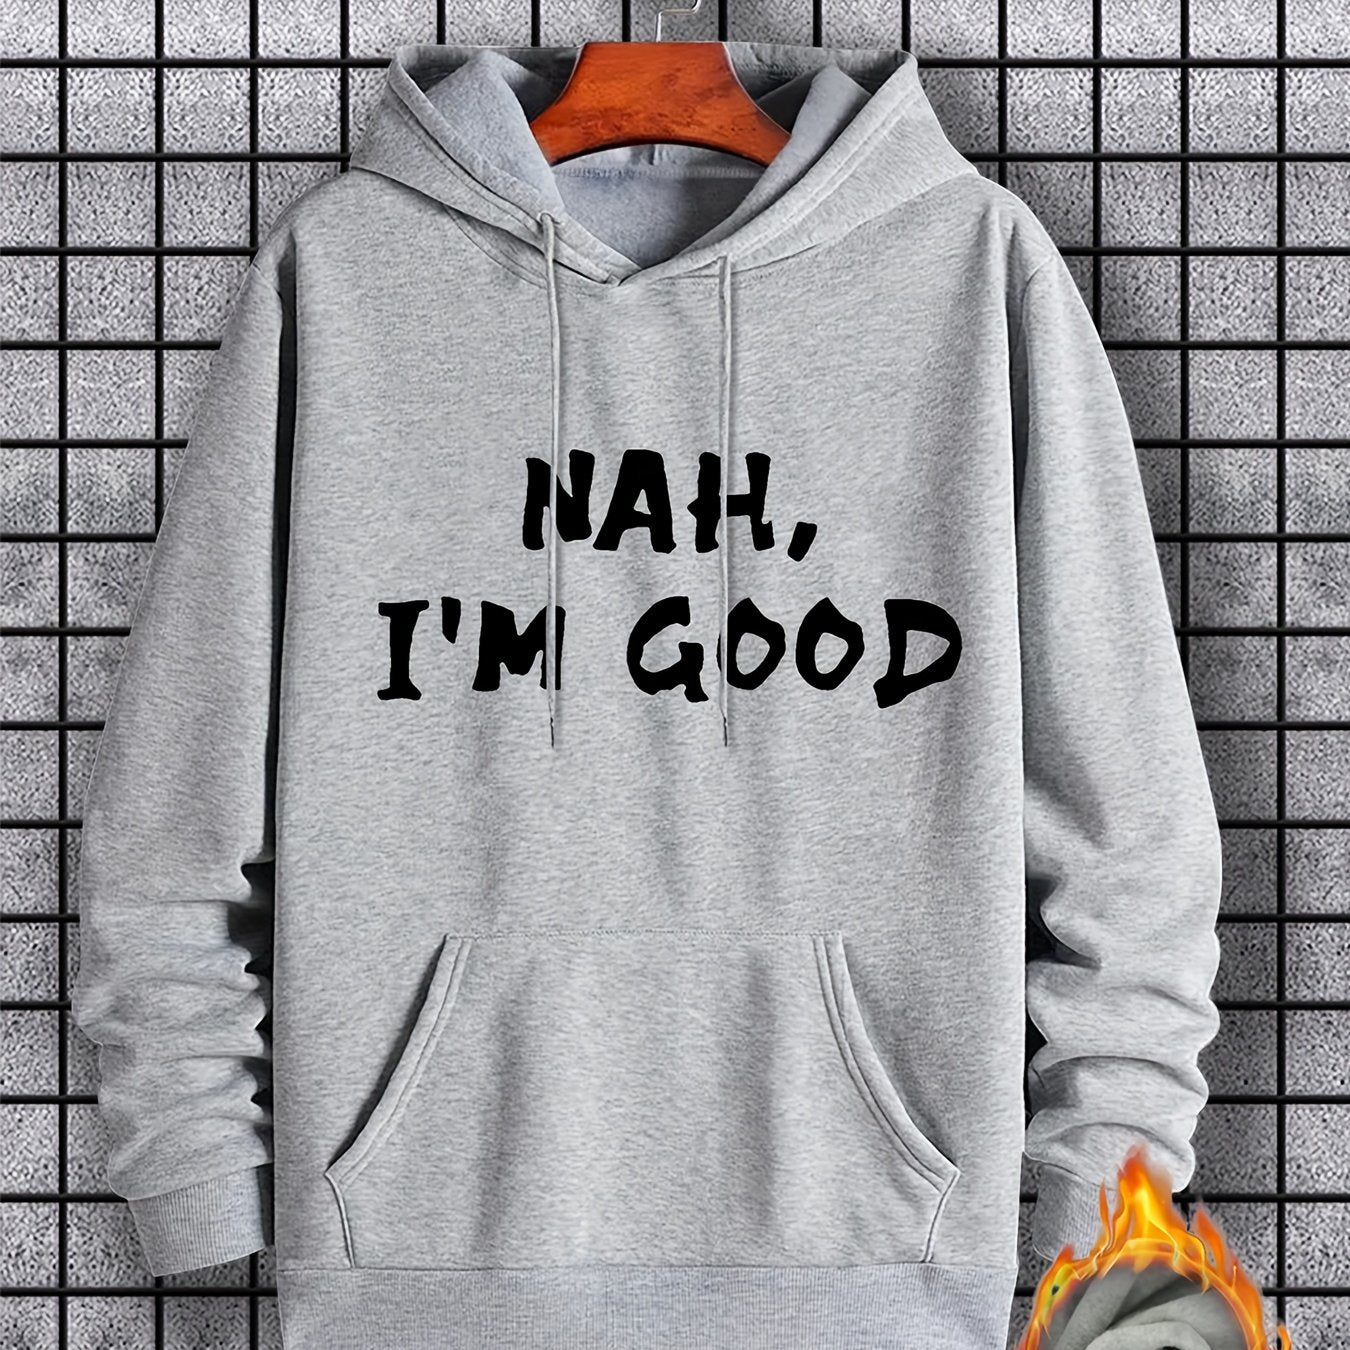 I'm Good Print Hoodie, Cool Hoodies For Men, Men's Casual Graphic Design Pullover Hooded Sweatshirt With Kangaroo Pocket Streetwear For Winter Fall, As Gifts